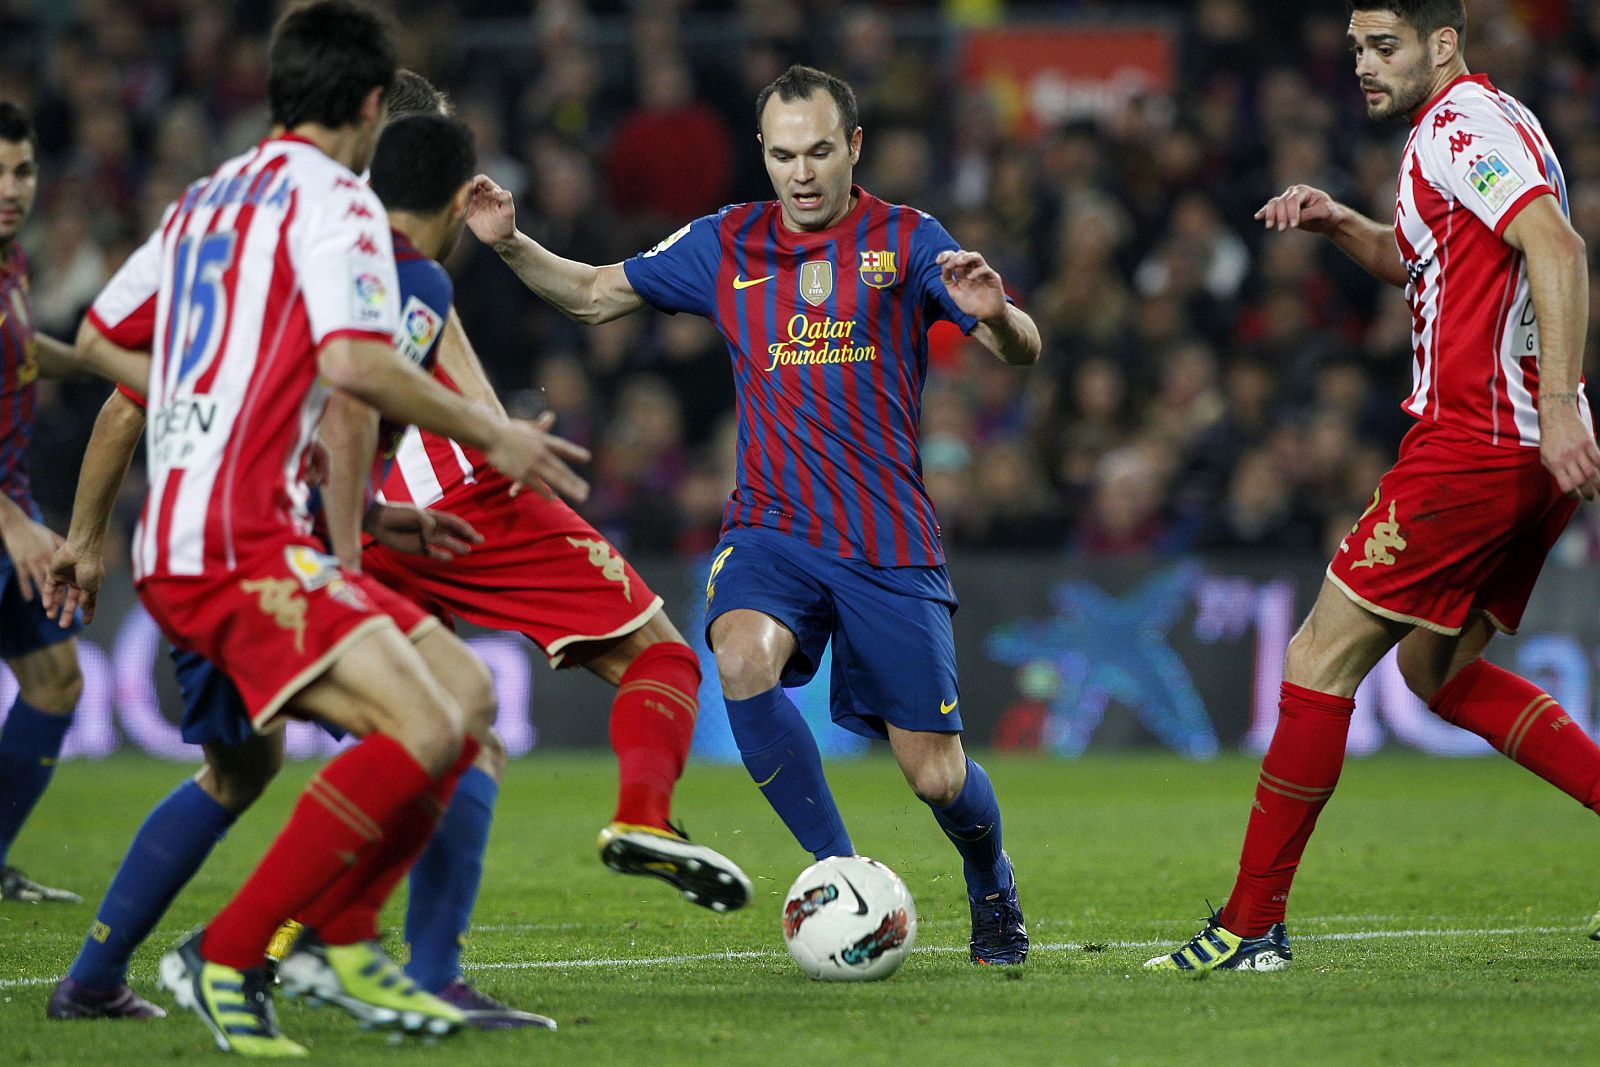 Barcelona's Iniesta is challenged by Sporting de Gijon's players during their Spanish first division soccer match at the Nou Camp stadium in Barcelona